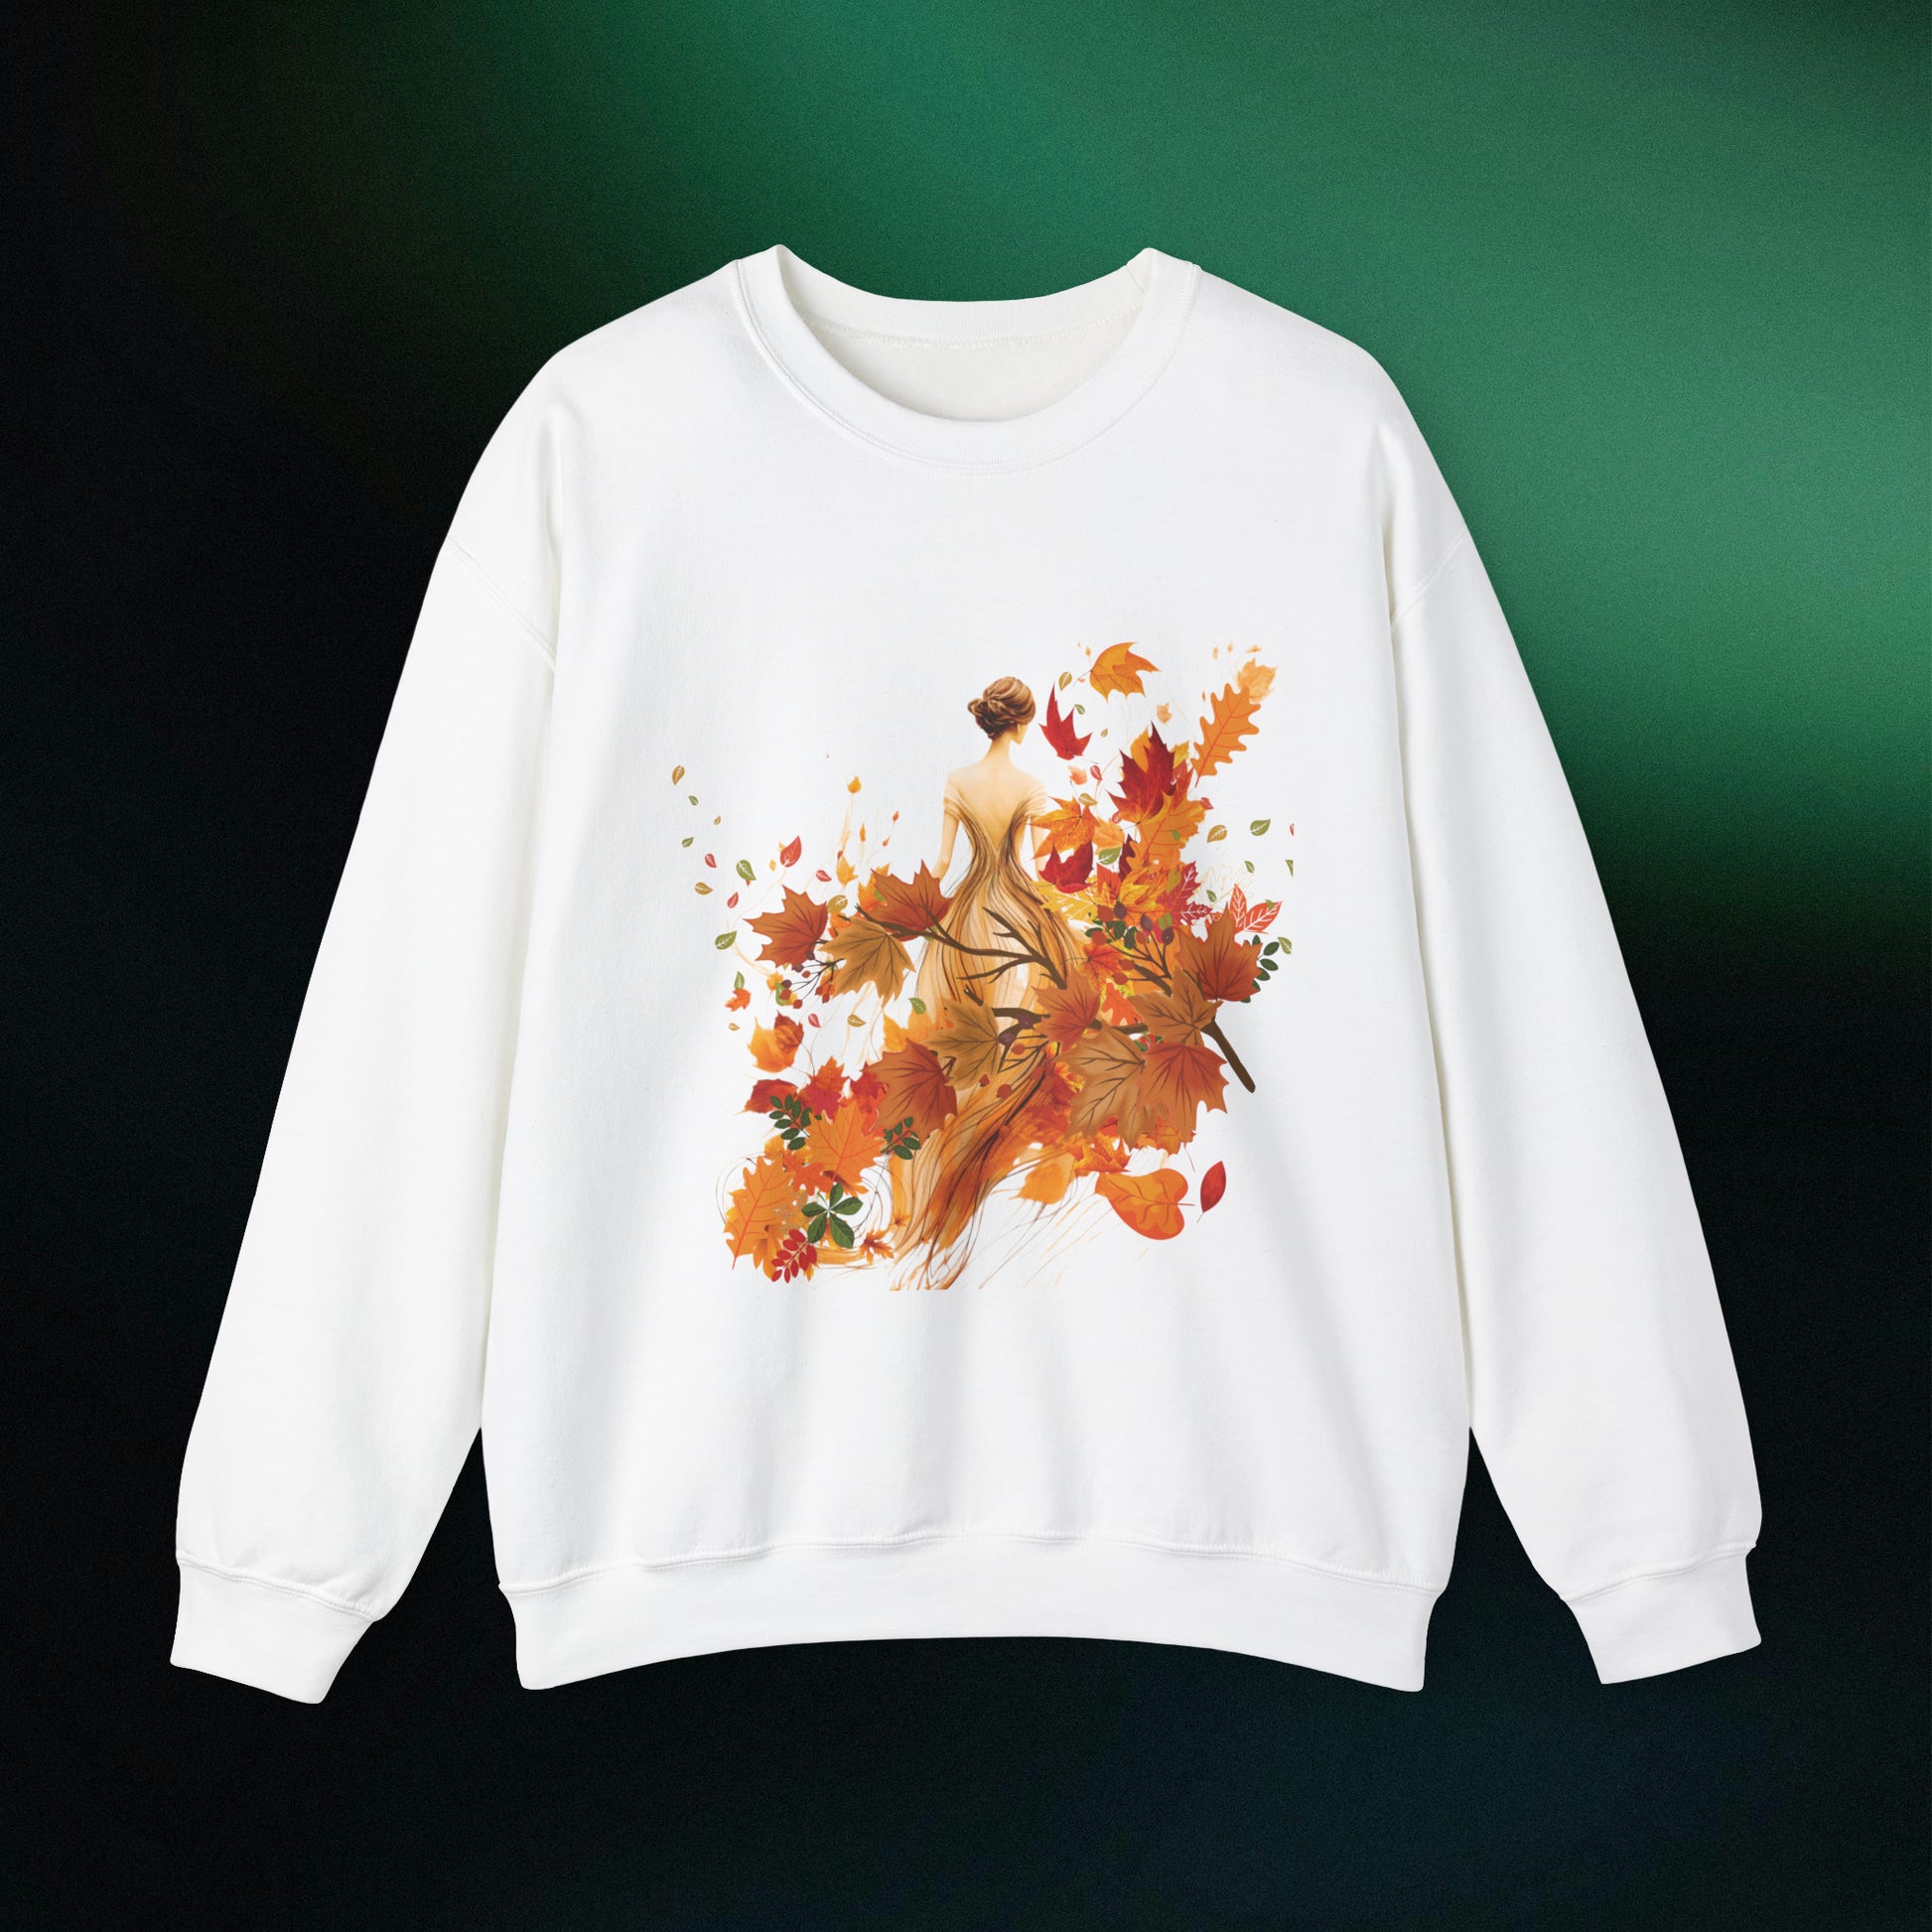 Whimsical Dreams in Autumn Hues: Romantic Dreamy Female Surrounded by Autumn Leaves Sweatshirt Sweatshirt S White 